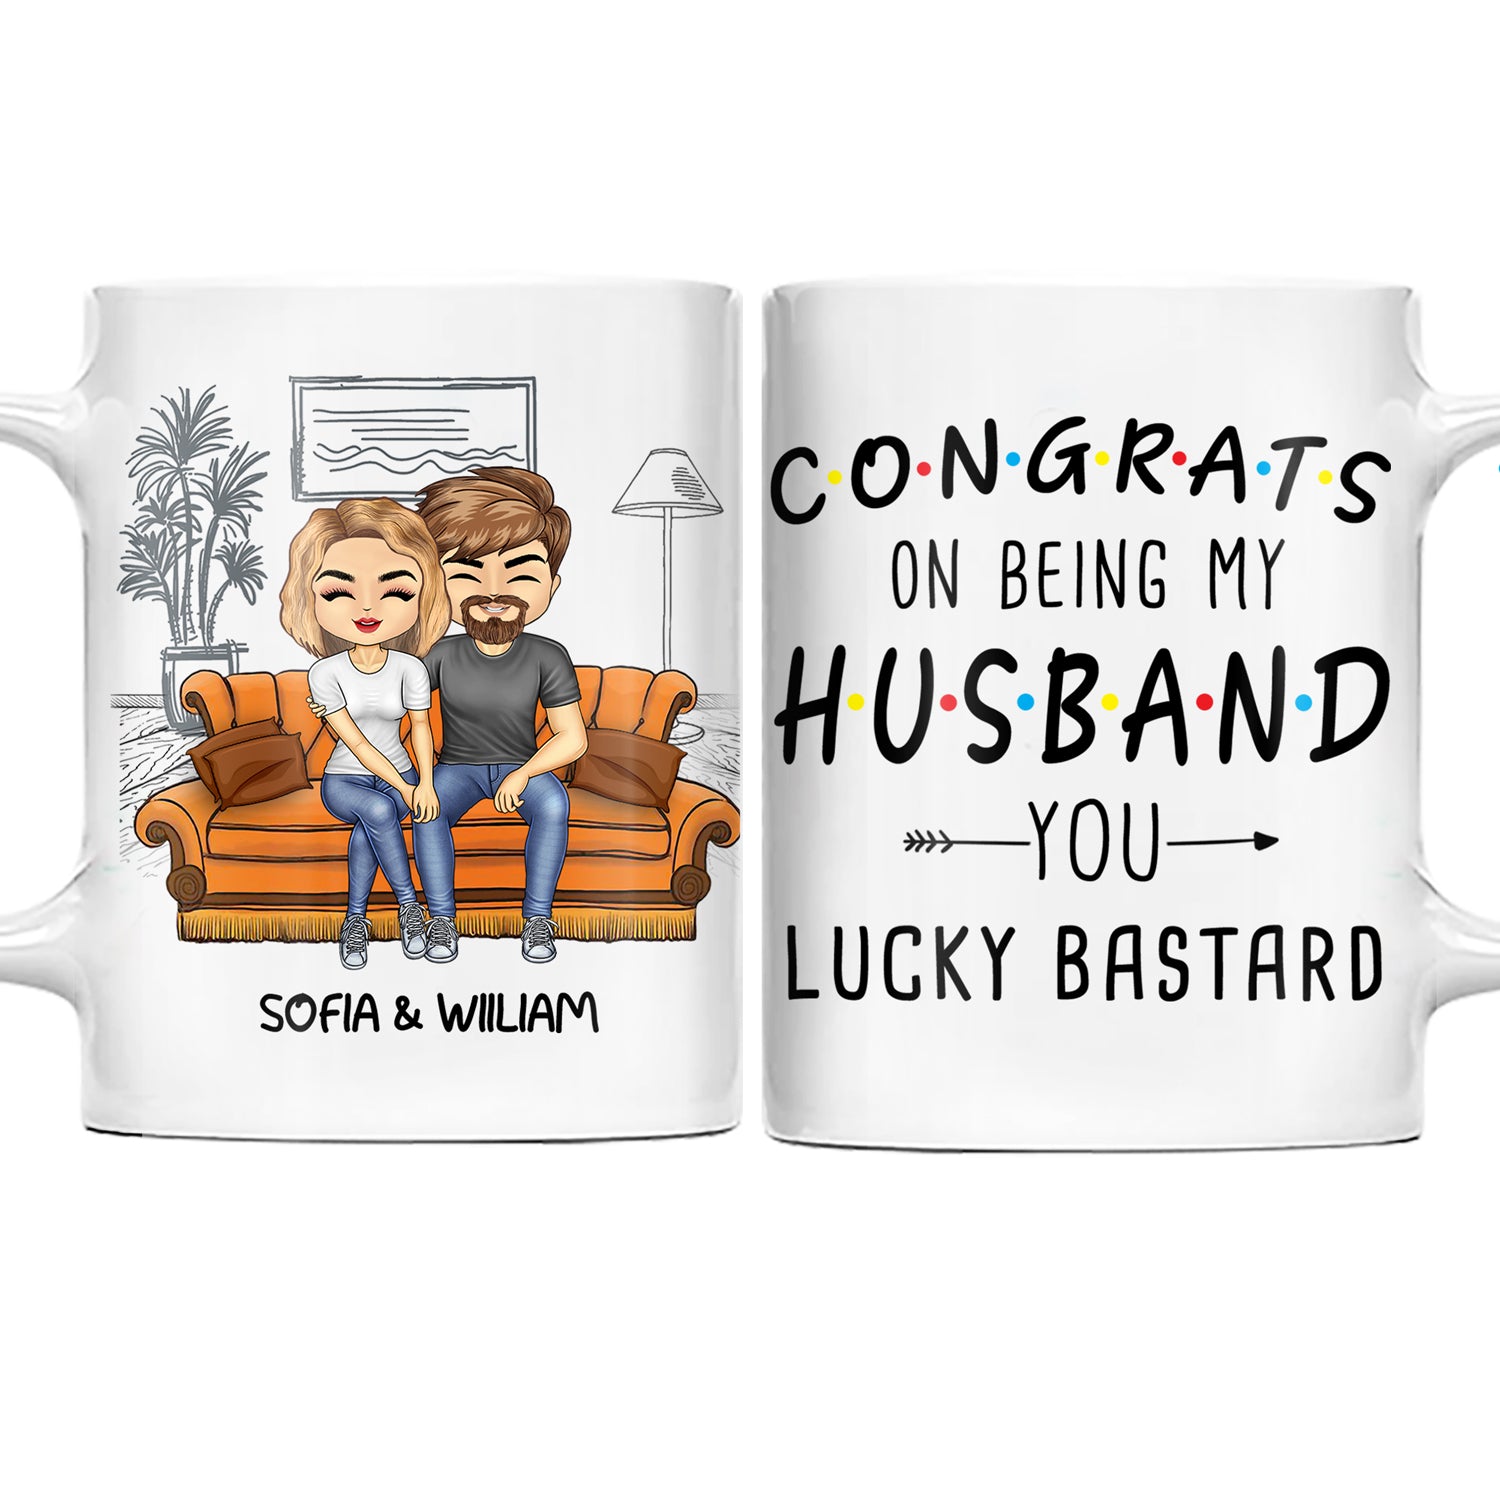 Congrats On Being My Husband You Lucky - Birthday, Anniversary Gift For Spouse, Lover, Hubby, Wifey, Wife, Boyfriend, Girlfriend, Couple - Personalized Custom Mug